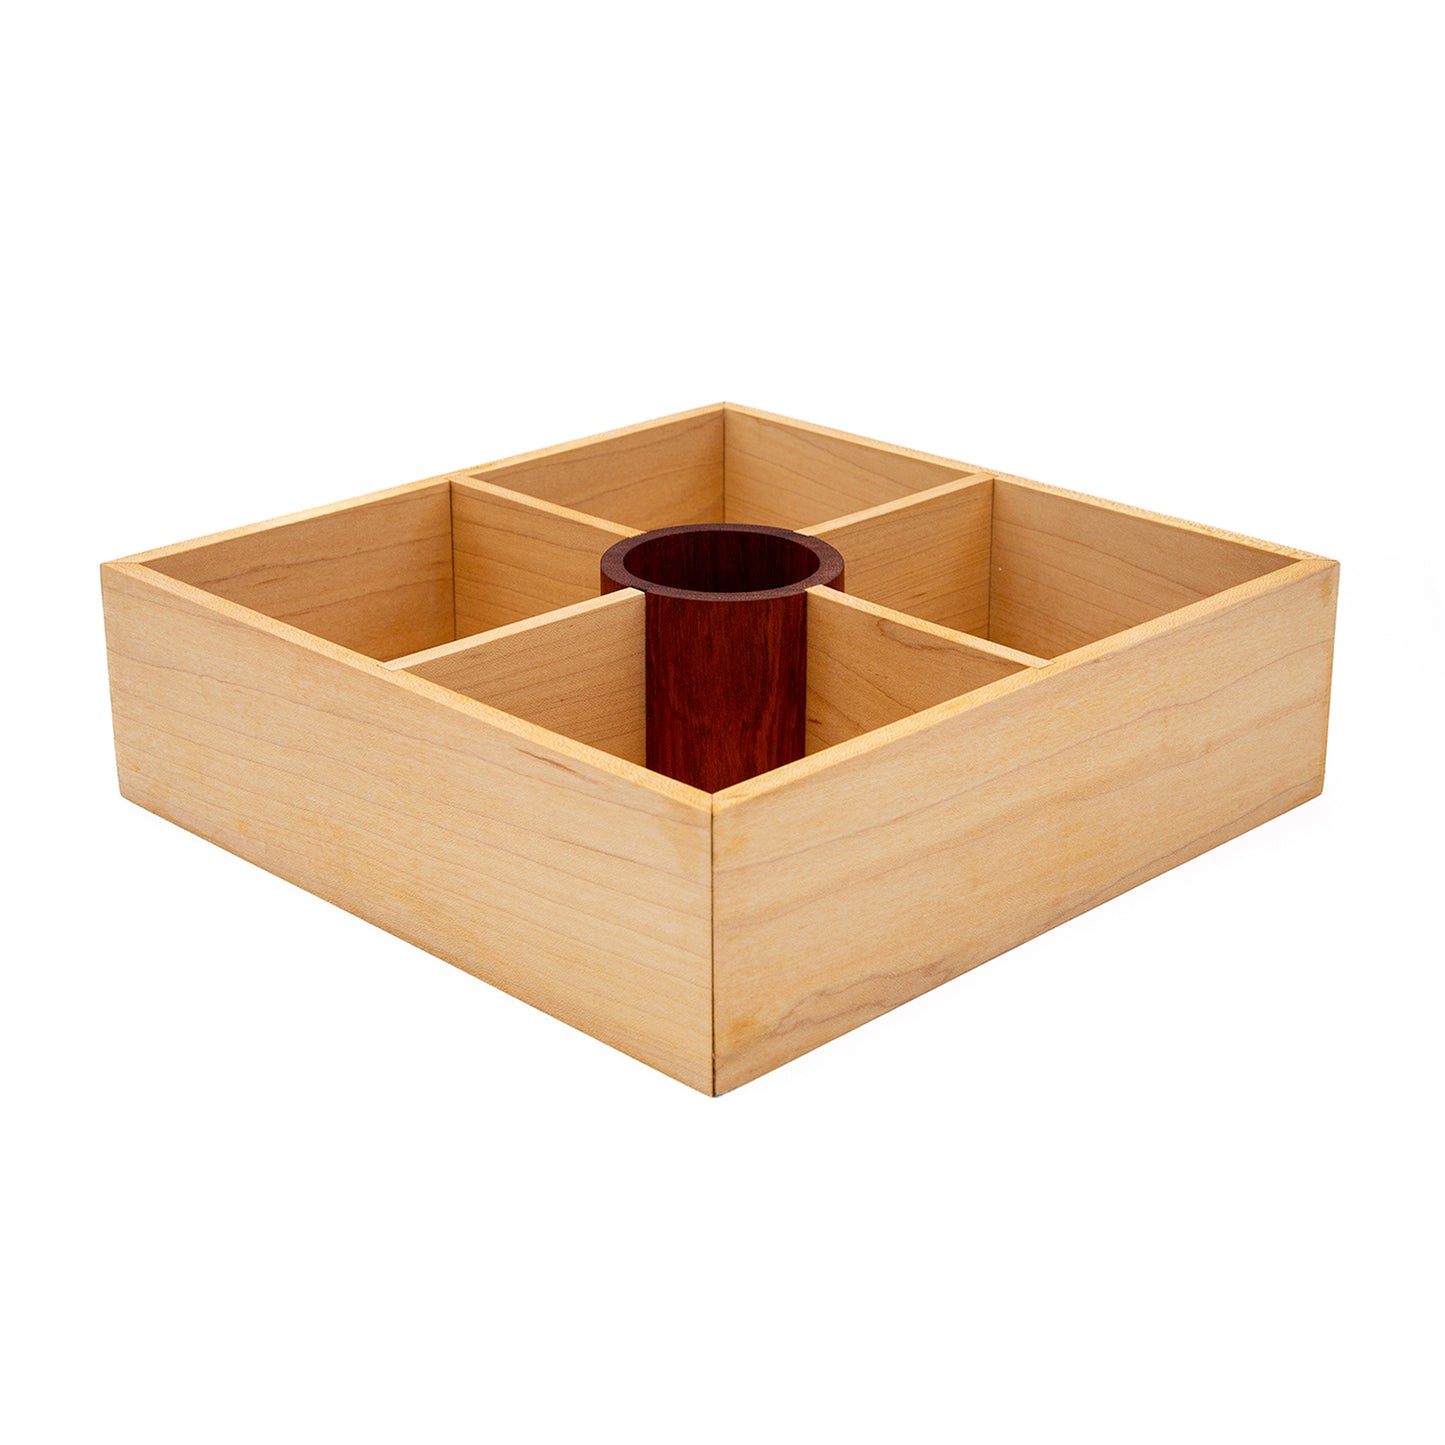 Wooden Lidded Square Box 6